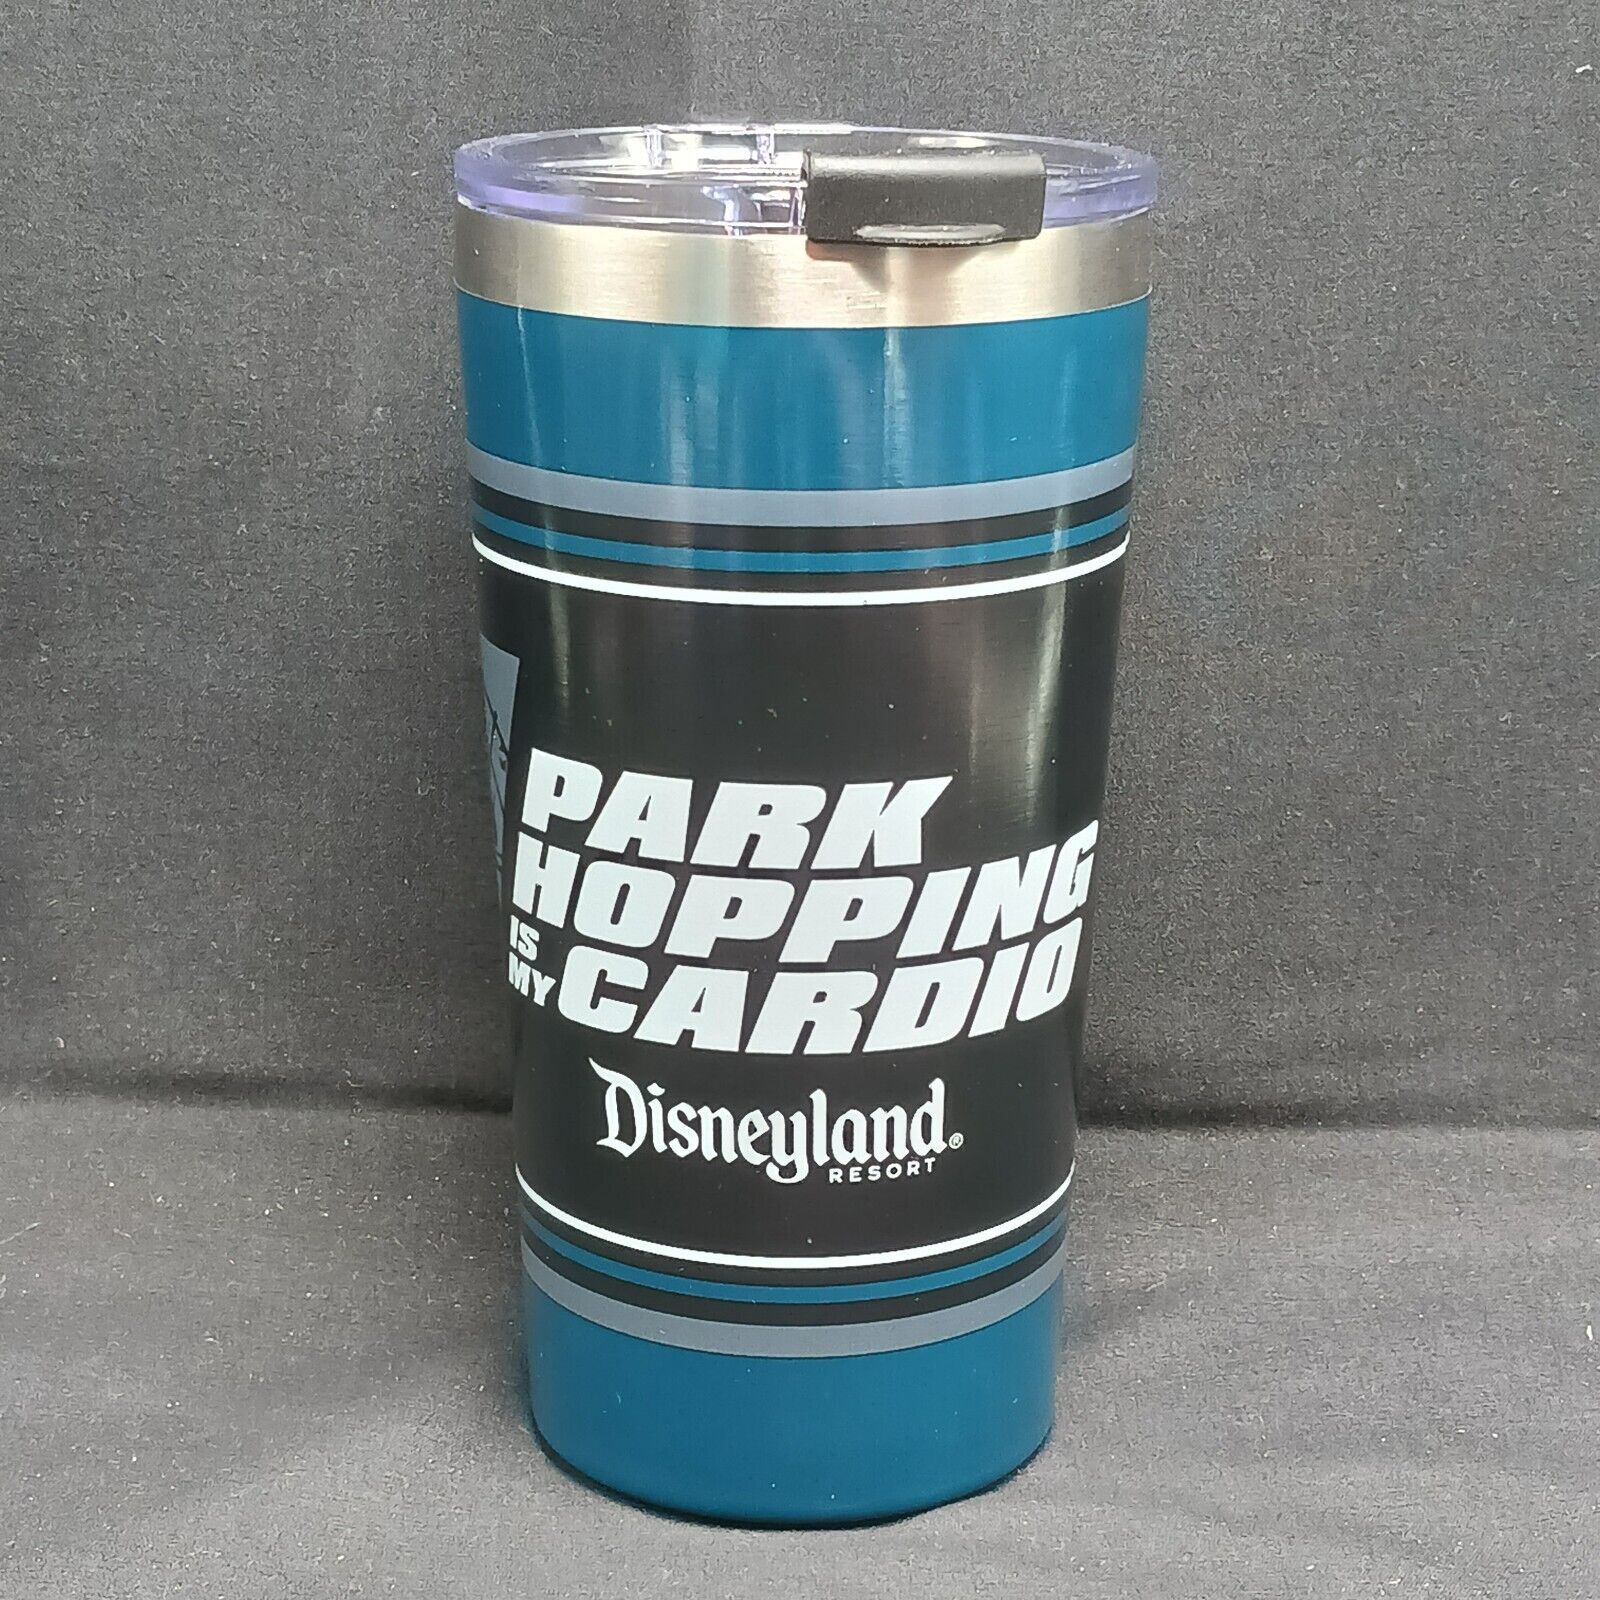 Disneyland Park Hopping Is My Cardio Park Icons 16oz Stainless Steel Tumbler